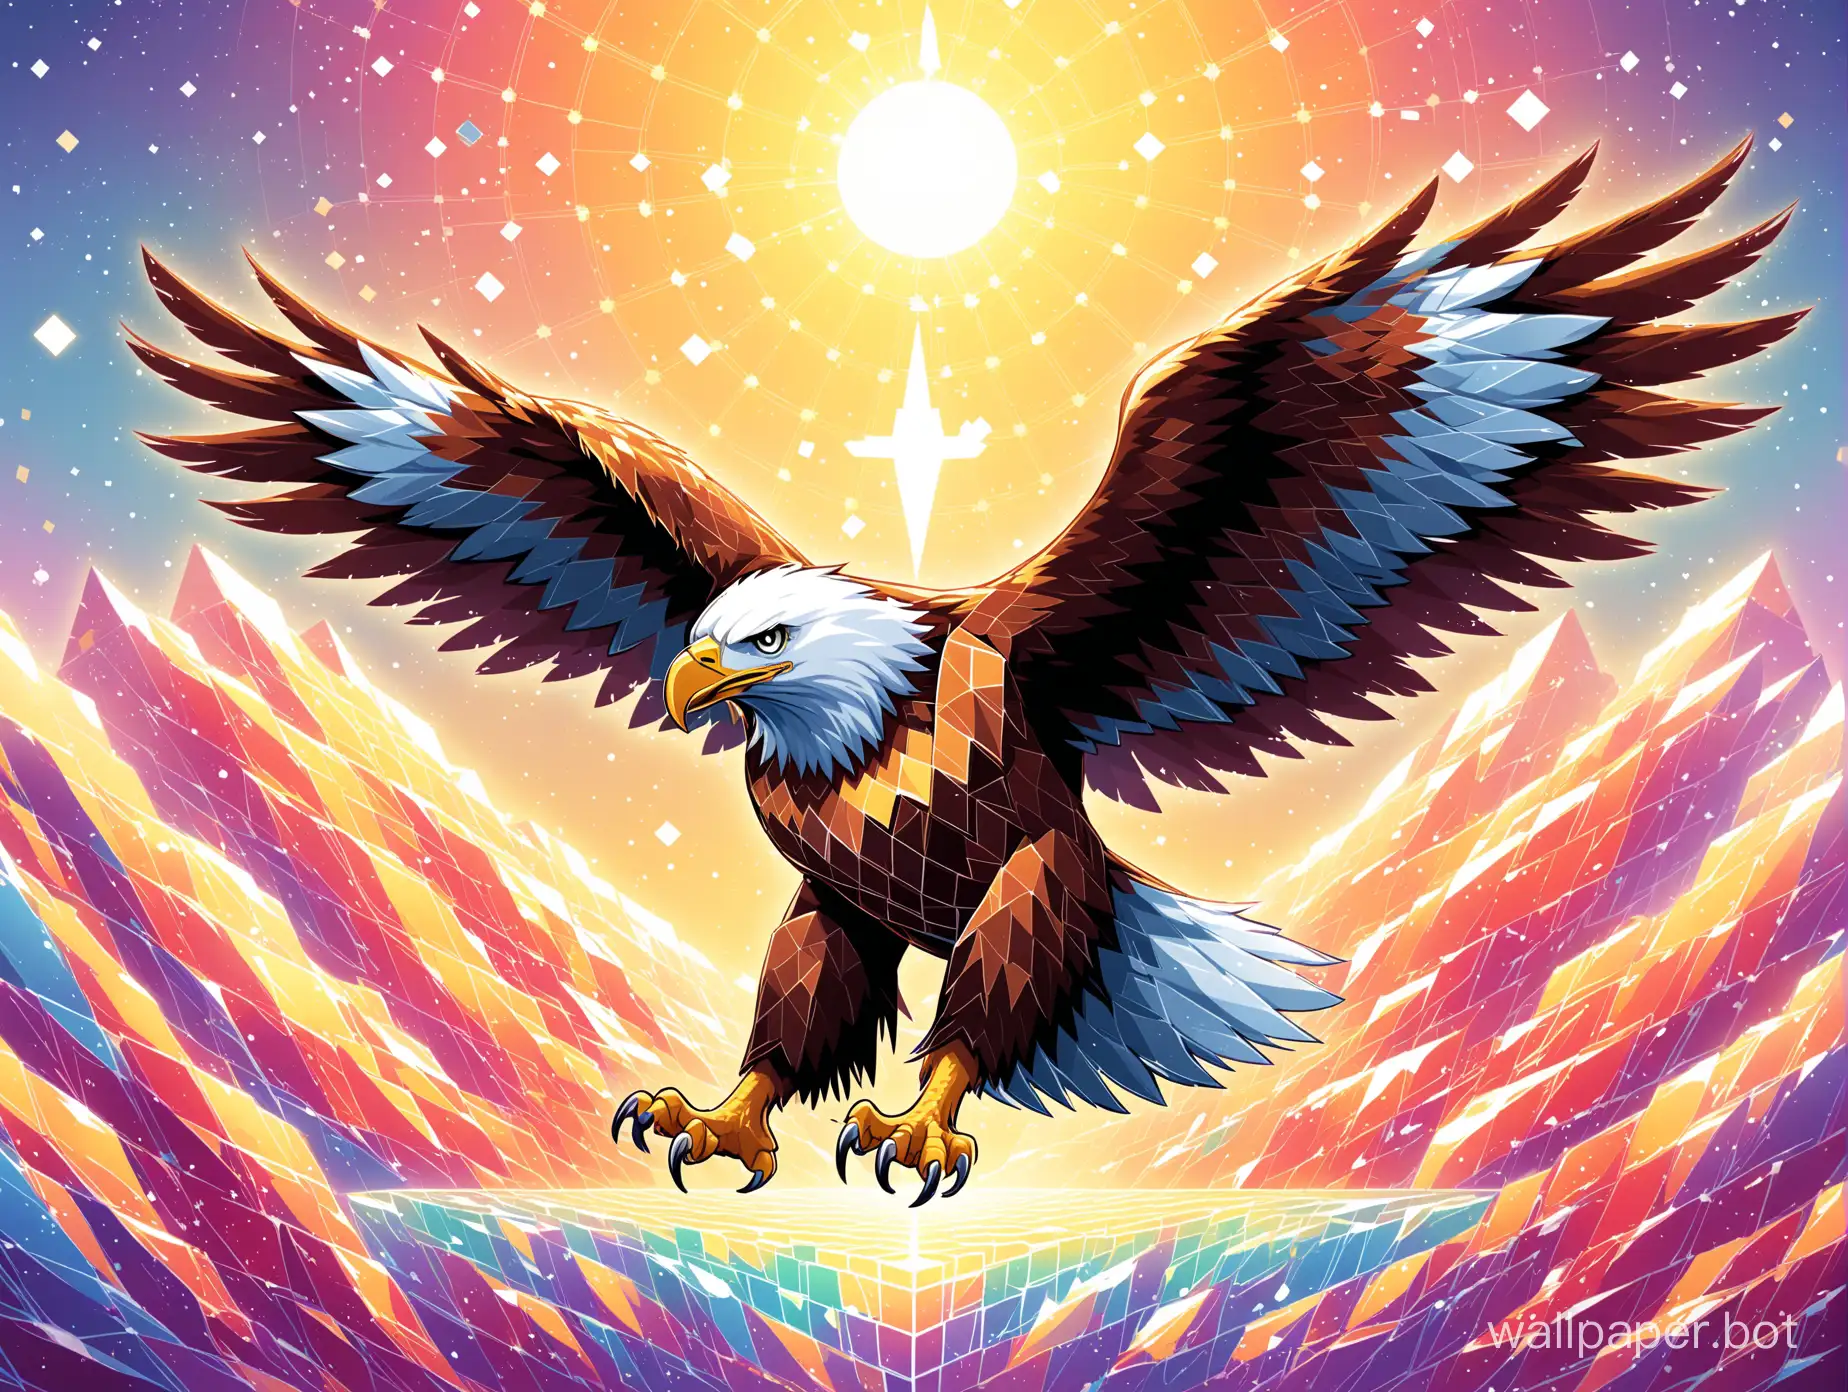 spirit of eagle in cubic style